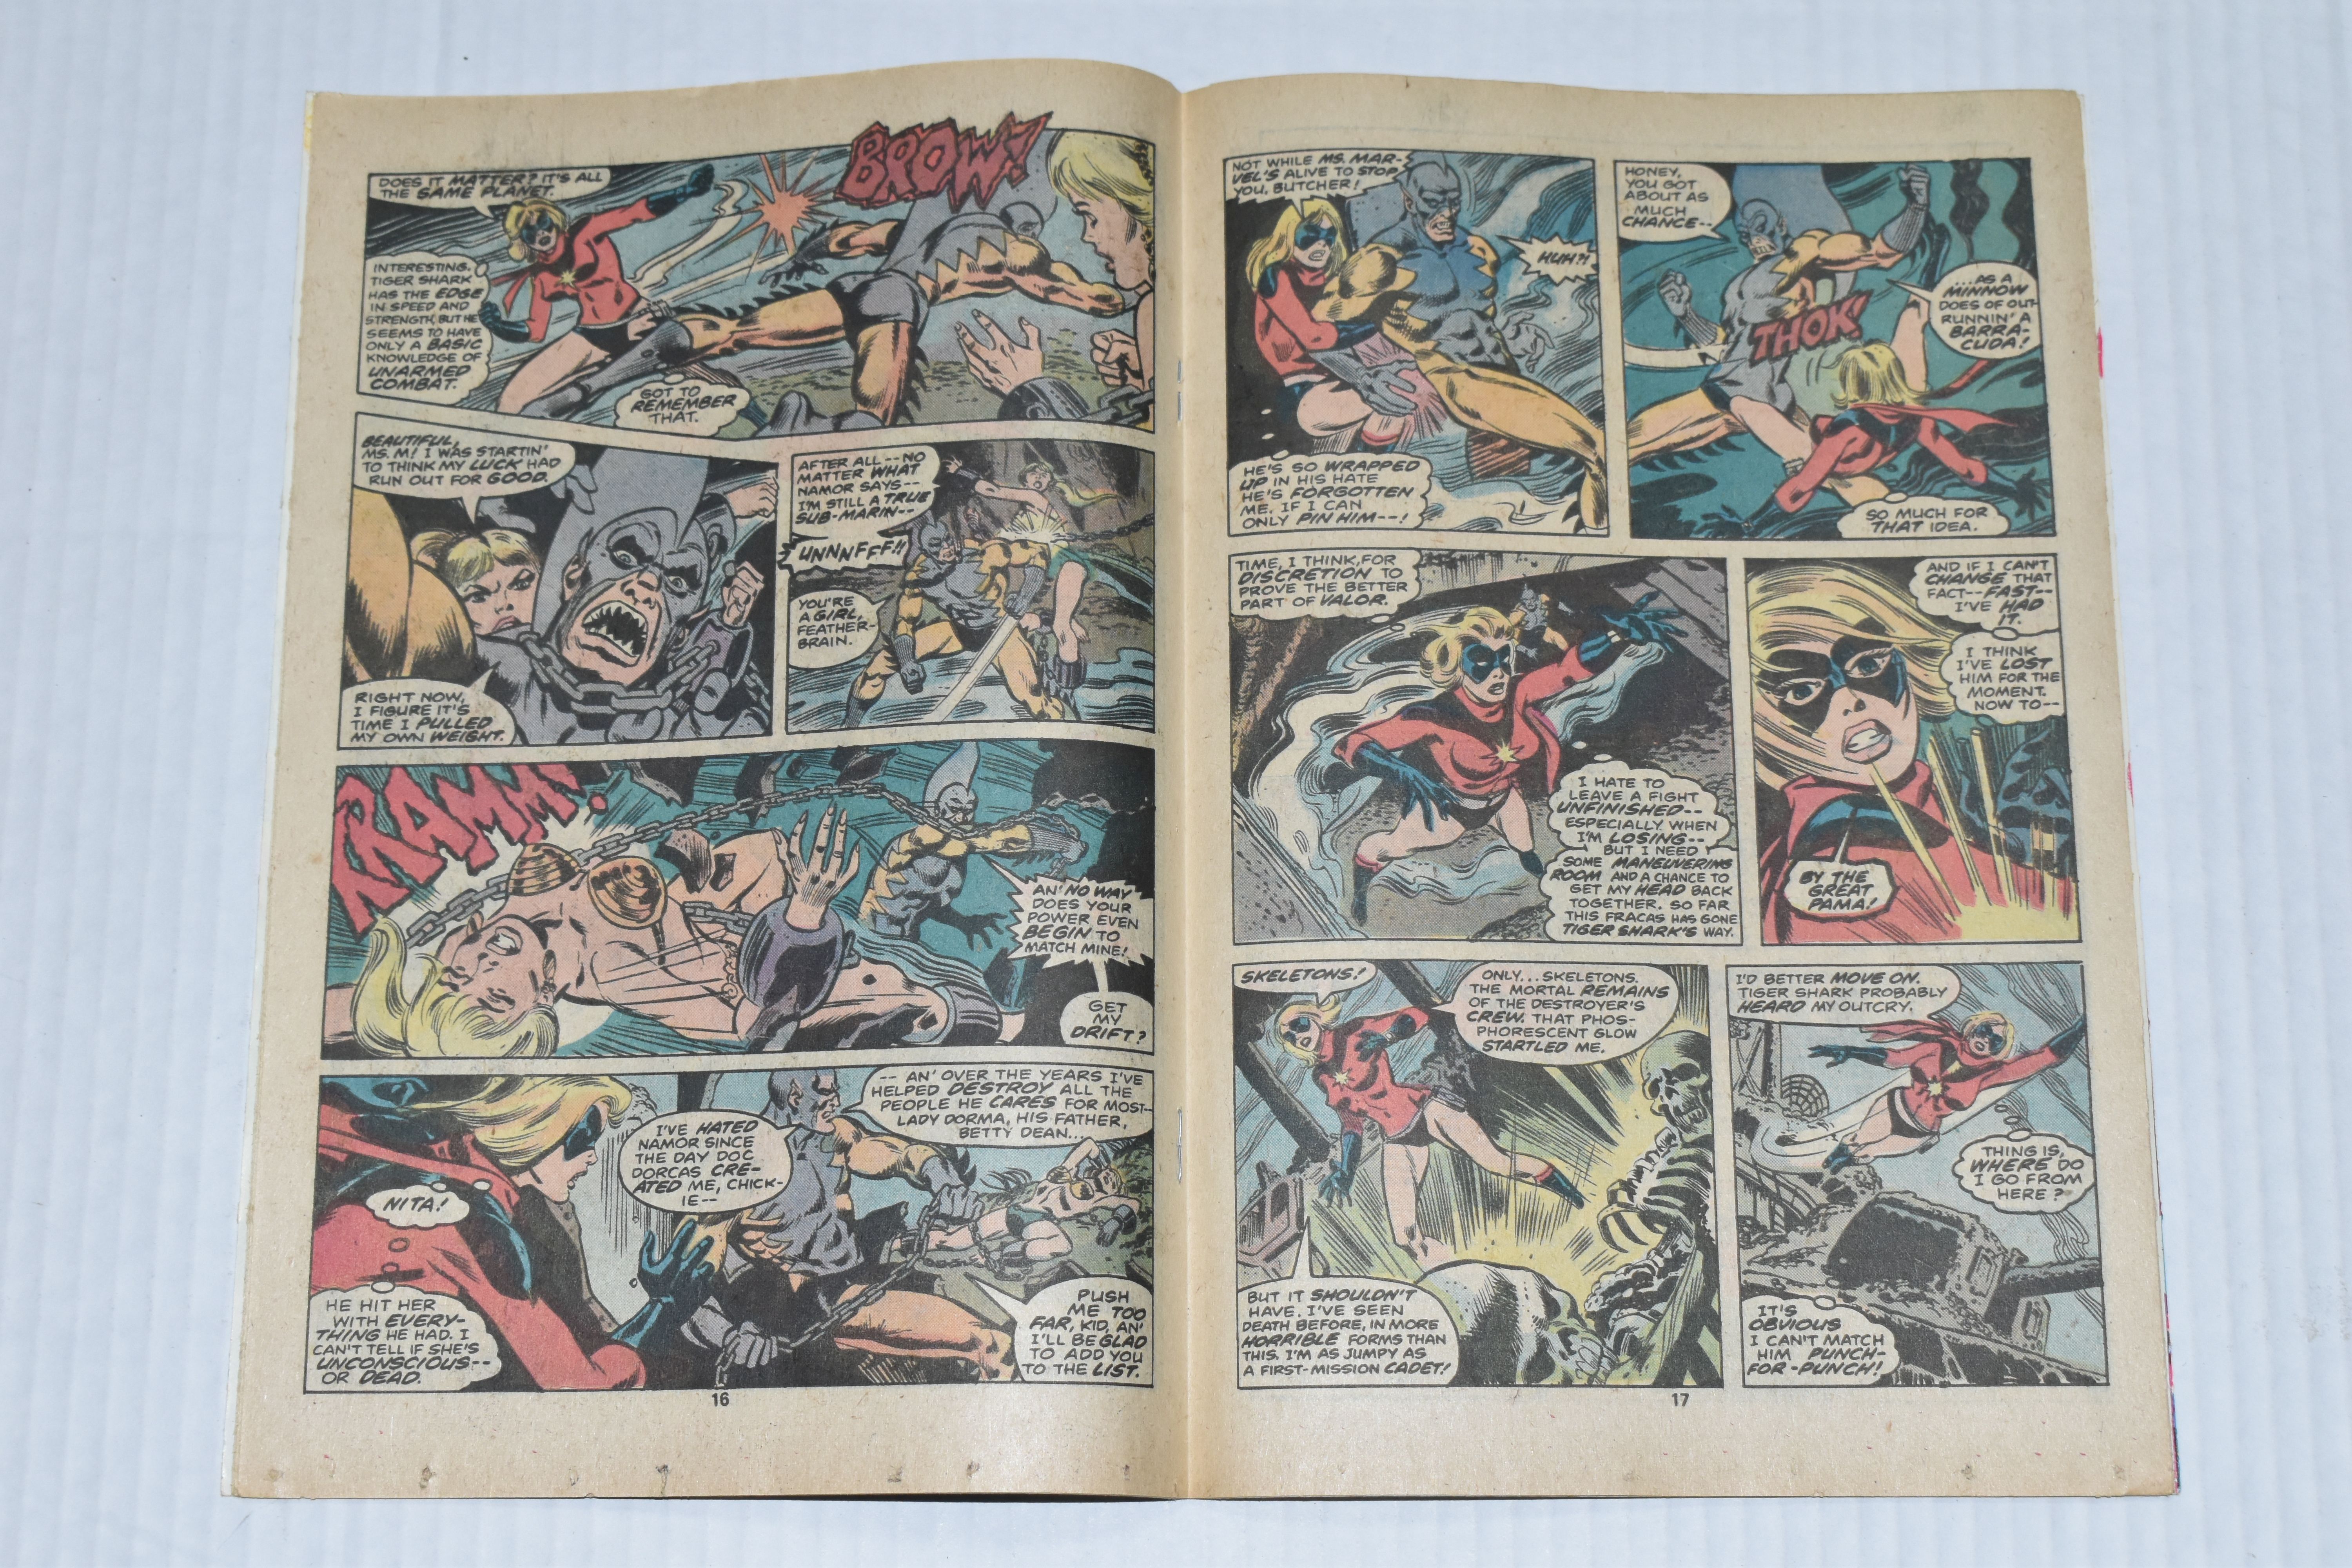 MS. MARVEL NOS. 16 & 18 MARVEL COMICS, first appearance of Mystique, comics show signs of wear, - Image 8 of 8